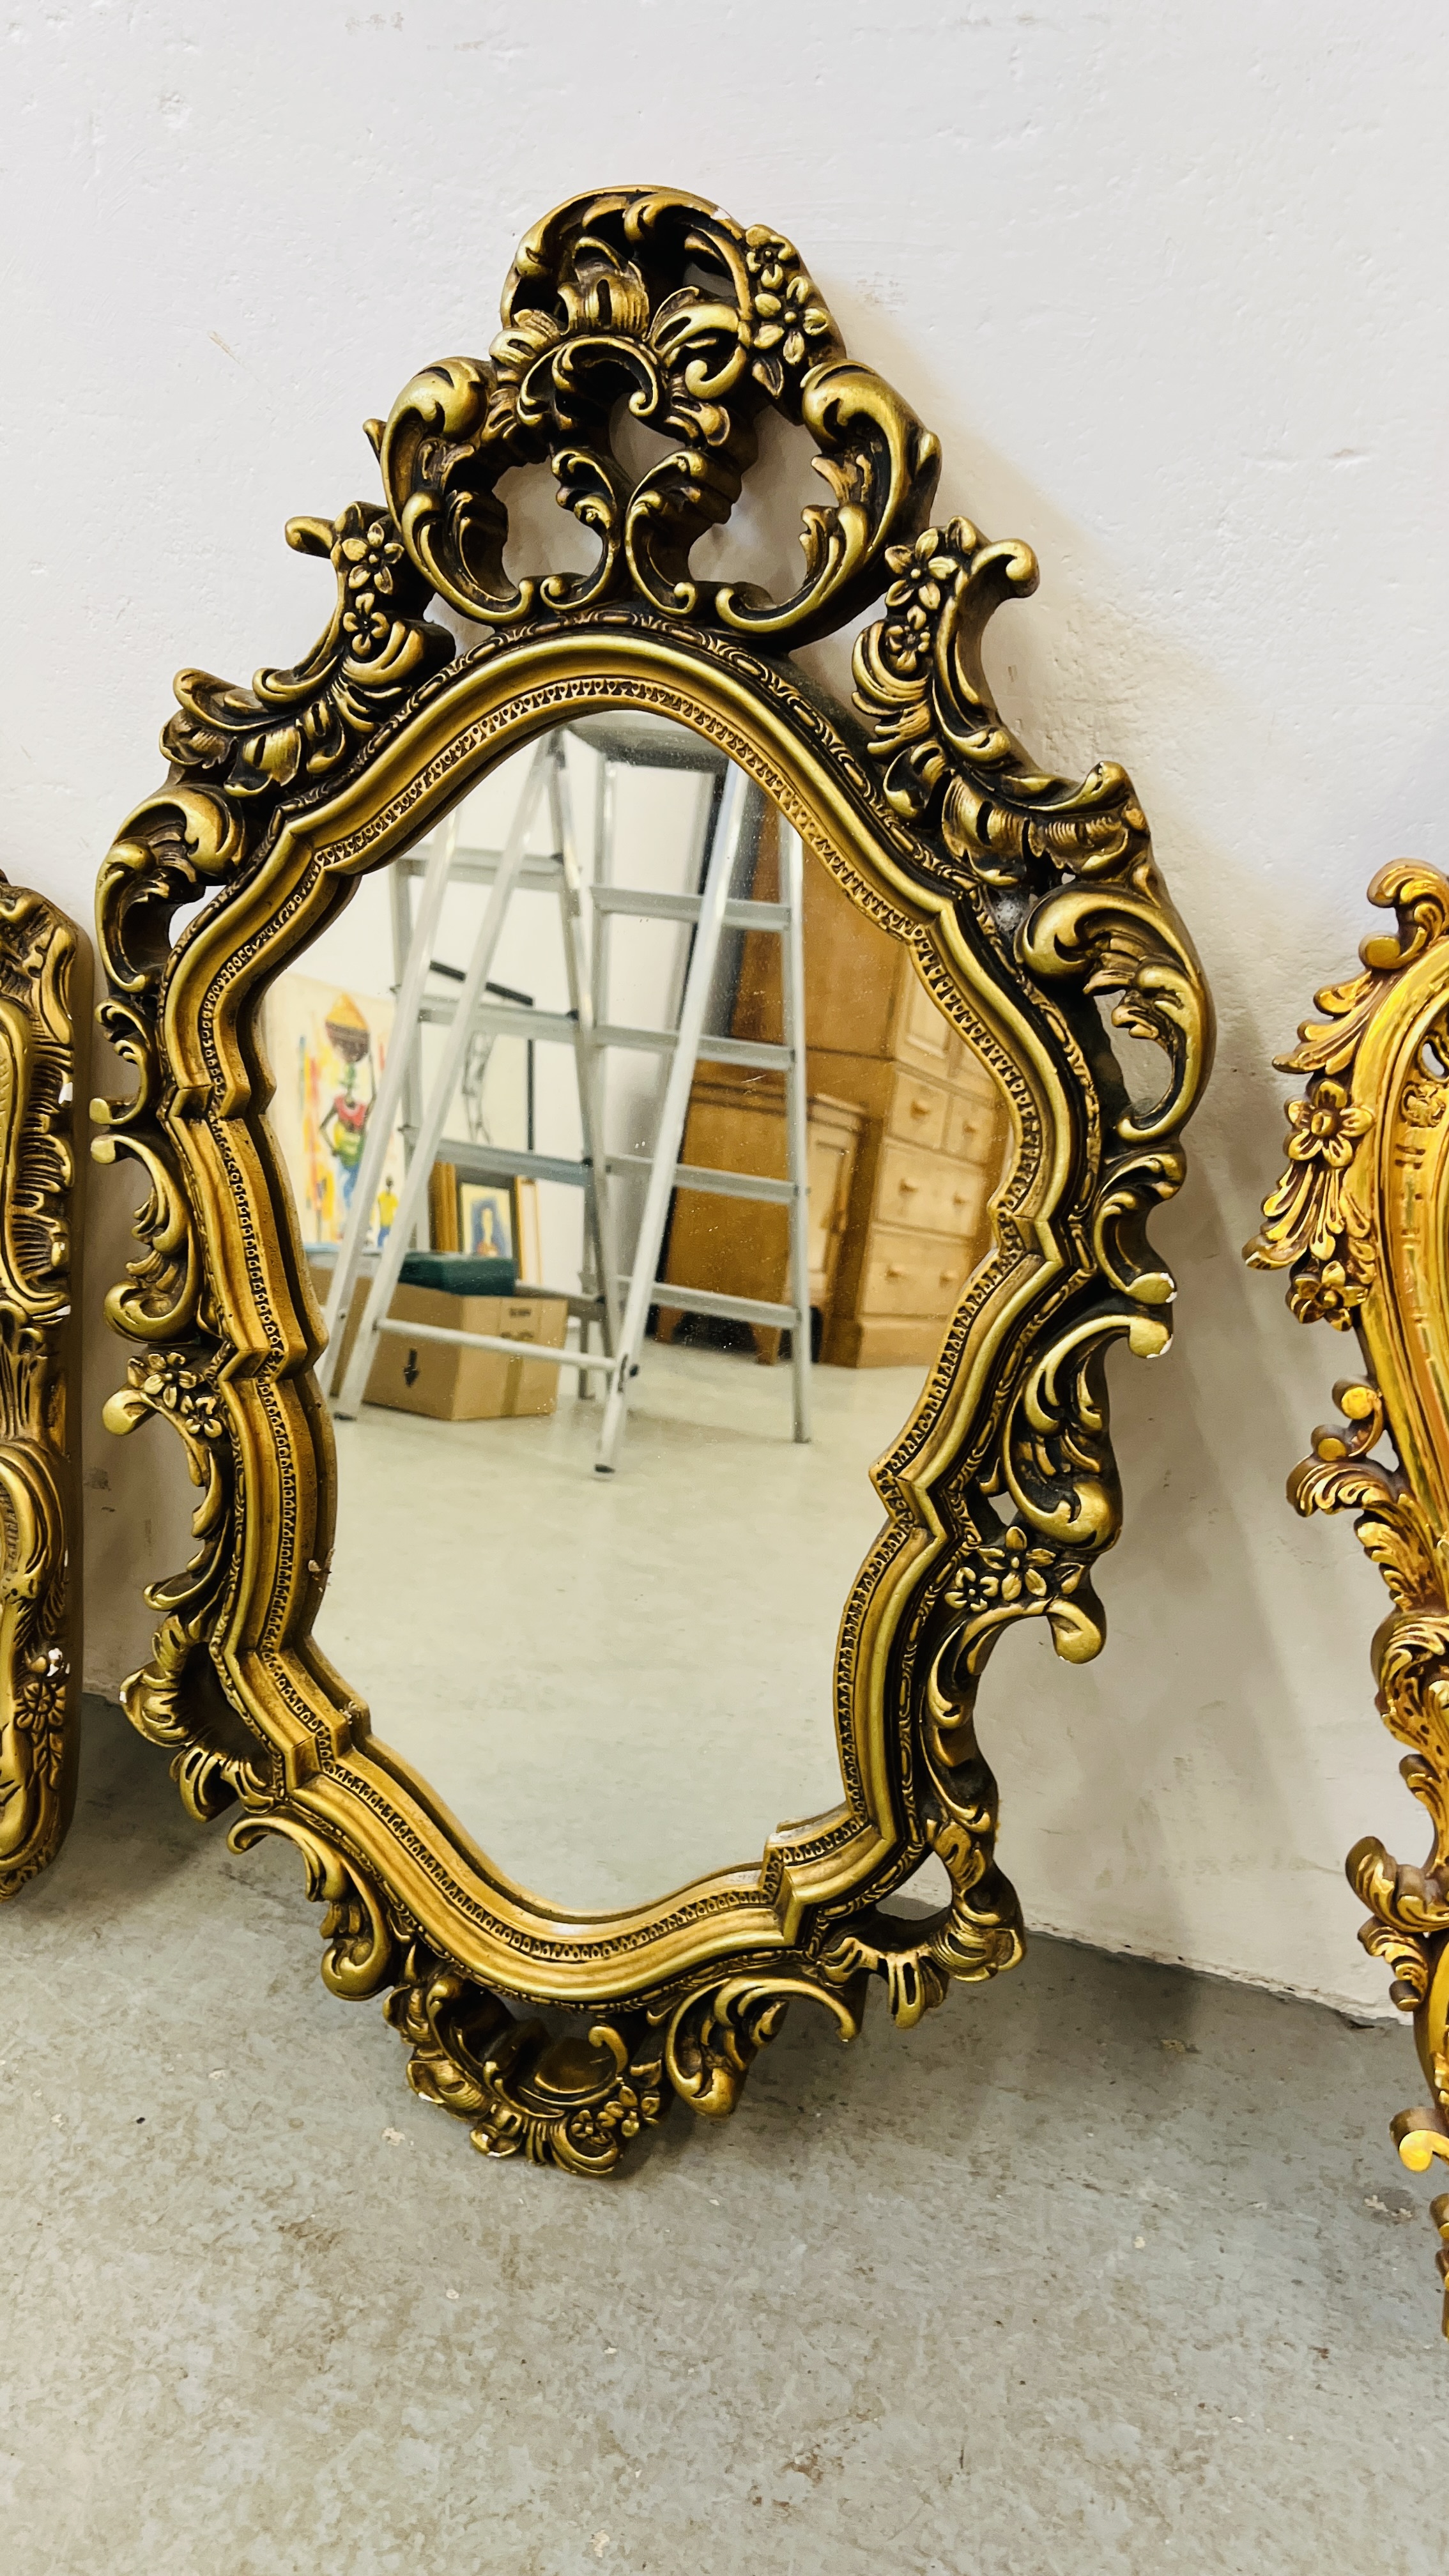 FOUR ORNATE GILT FRAMED DECORATIVE WALL MIRRORS OF VARIOUS DESIGNS - Image 3 of 6